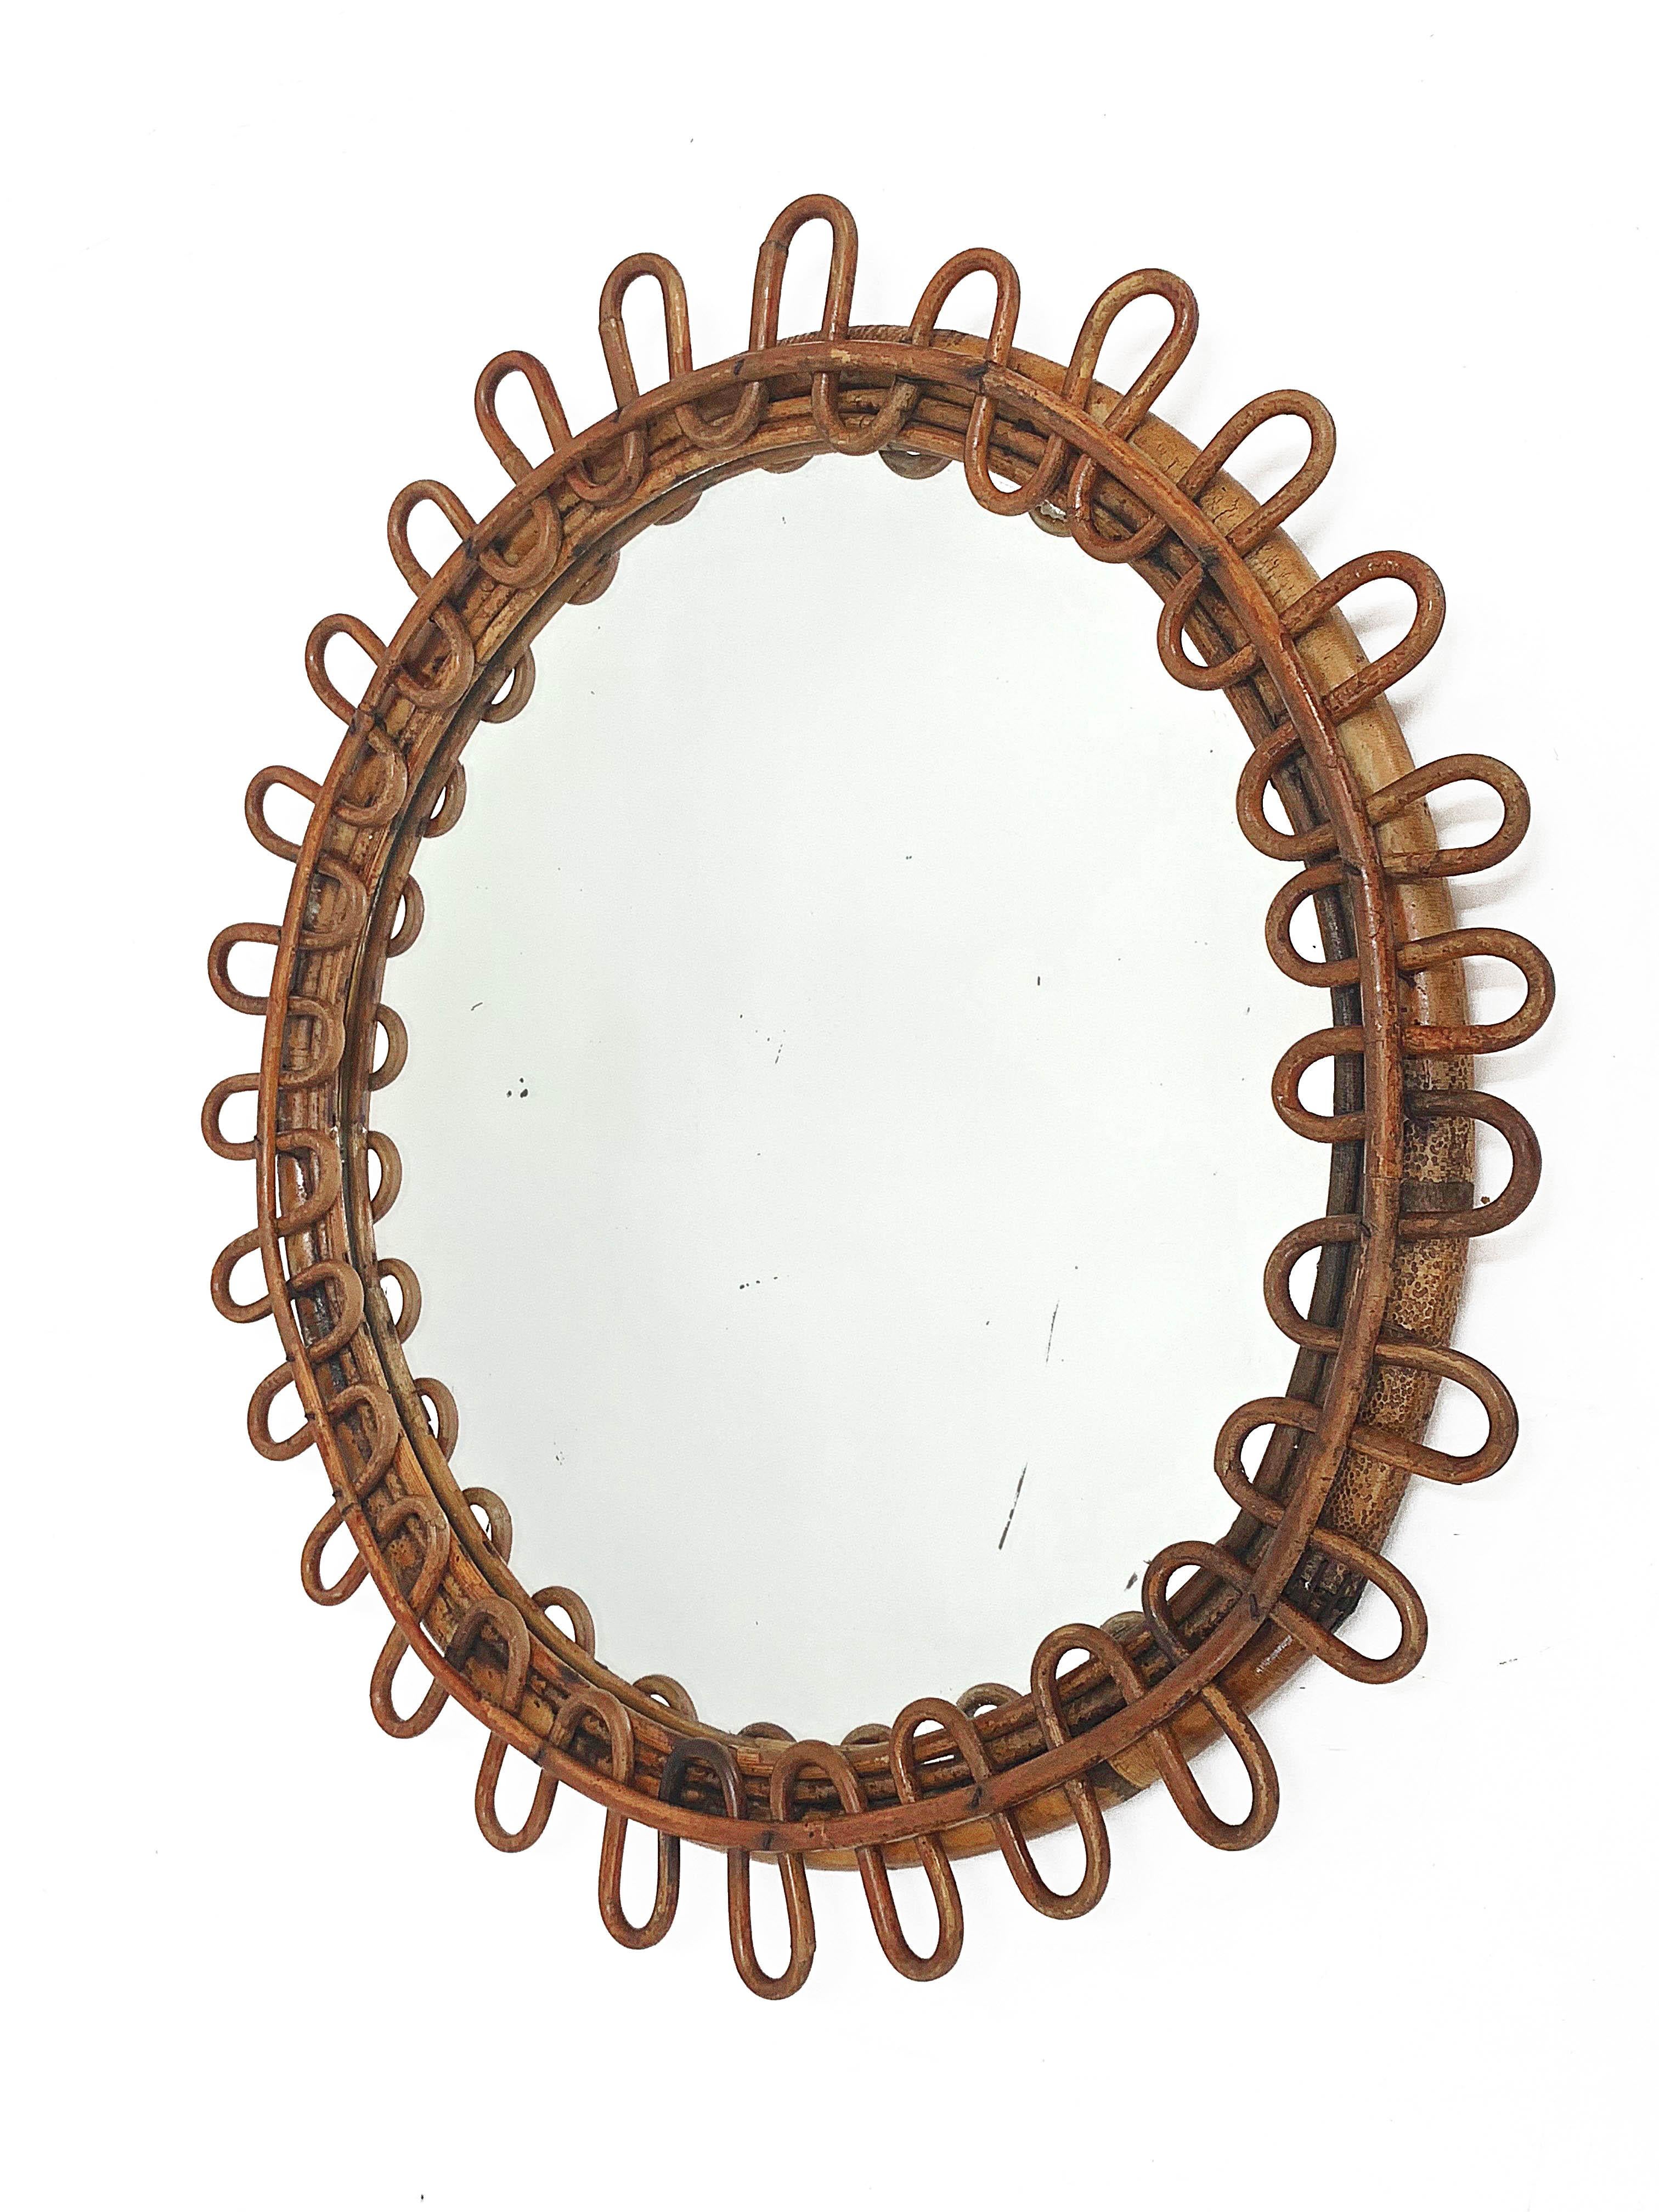 Amazing Mid-Century Modern round rattan Italian wall mirror.

This item is wonderful as it has a stunning sinusoidal frame made of rattan weaving. 

This piece is perfect to add deepness for a Riviera style living room or bedroom.

 